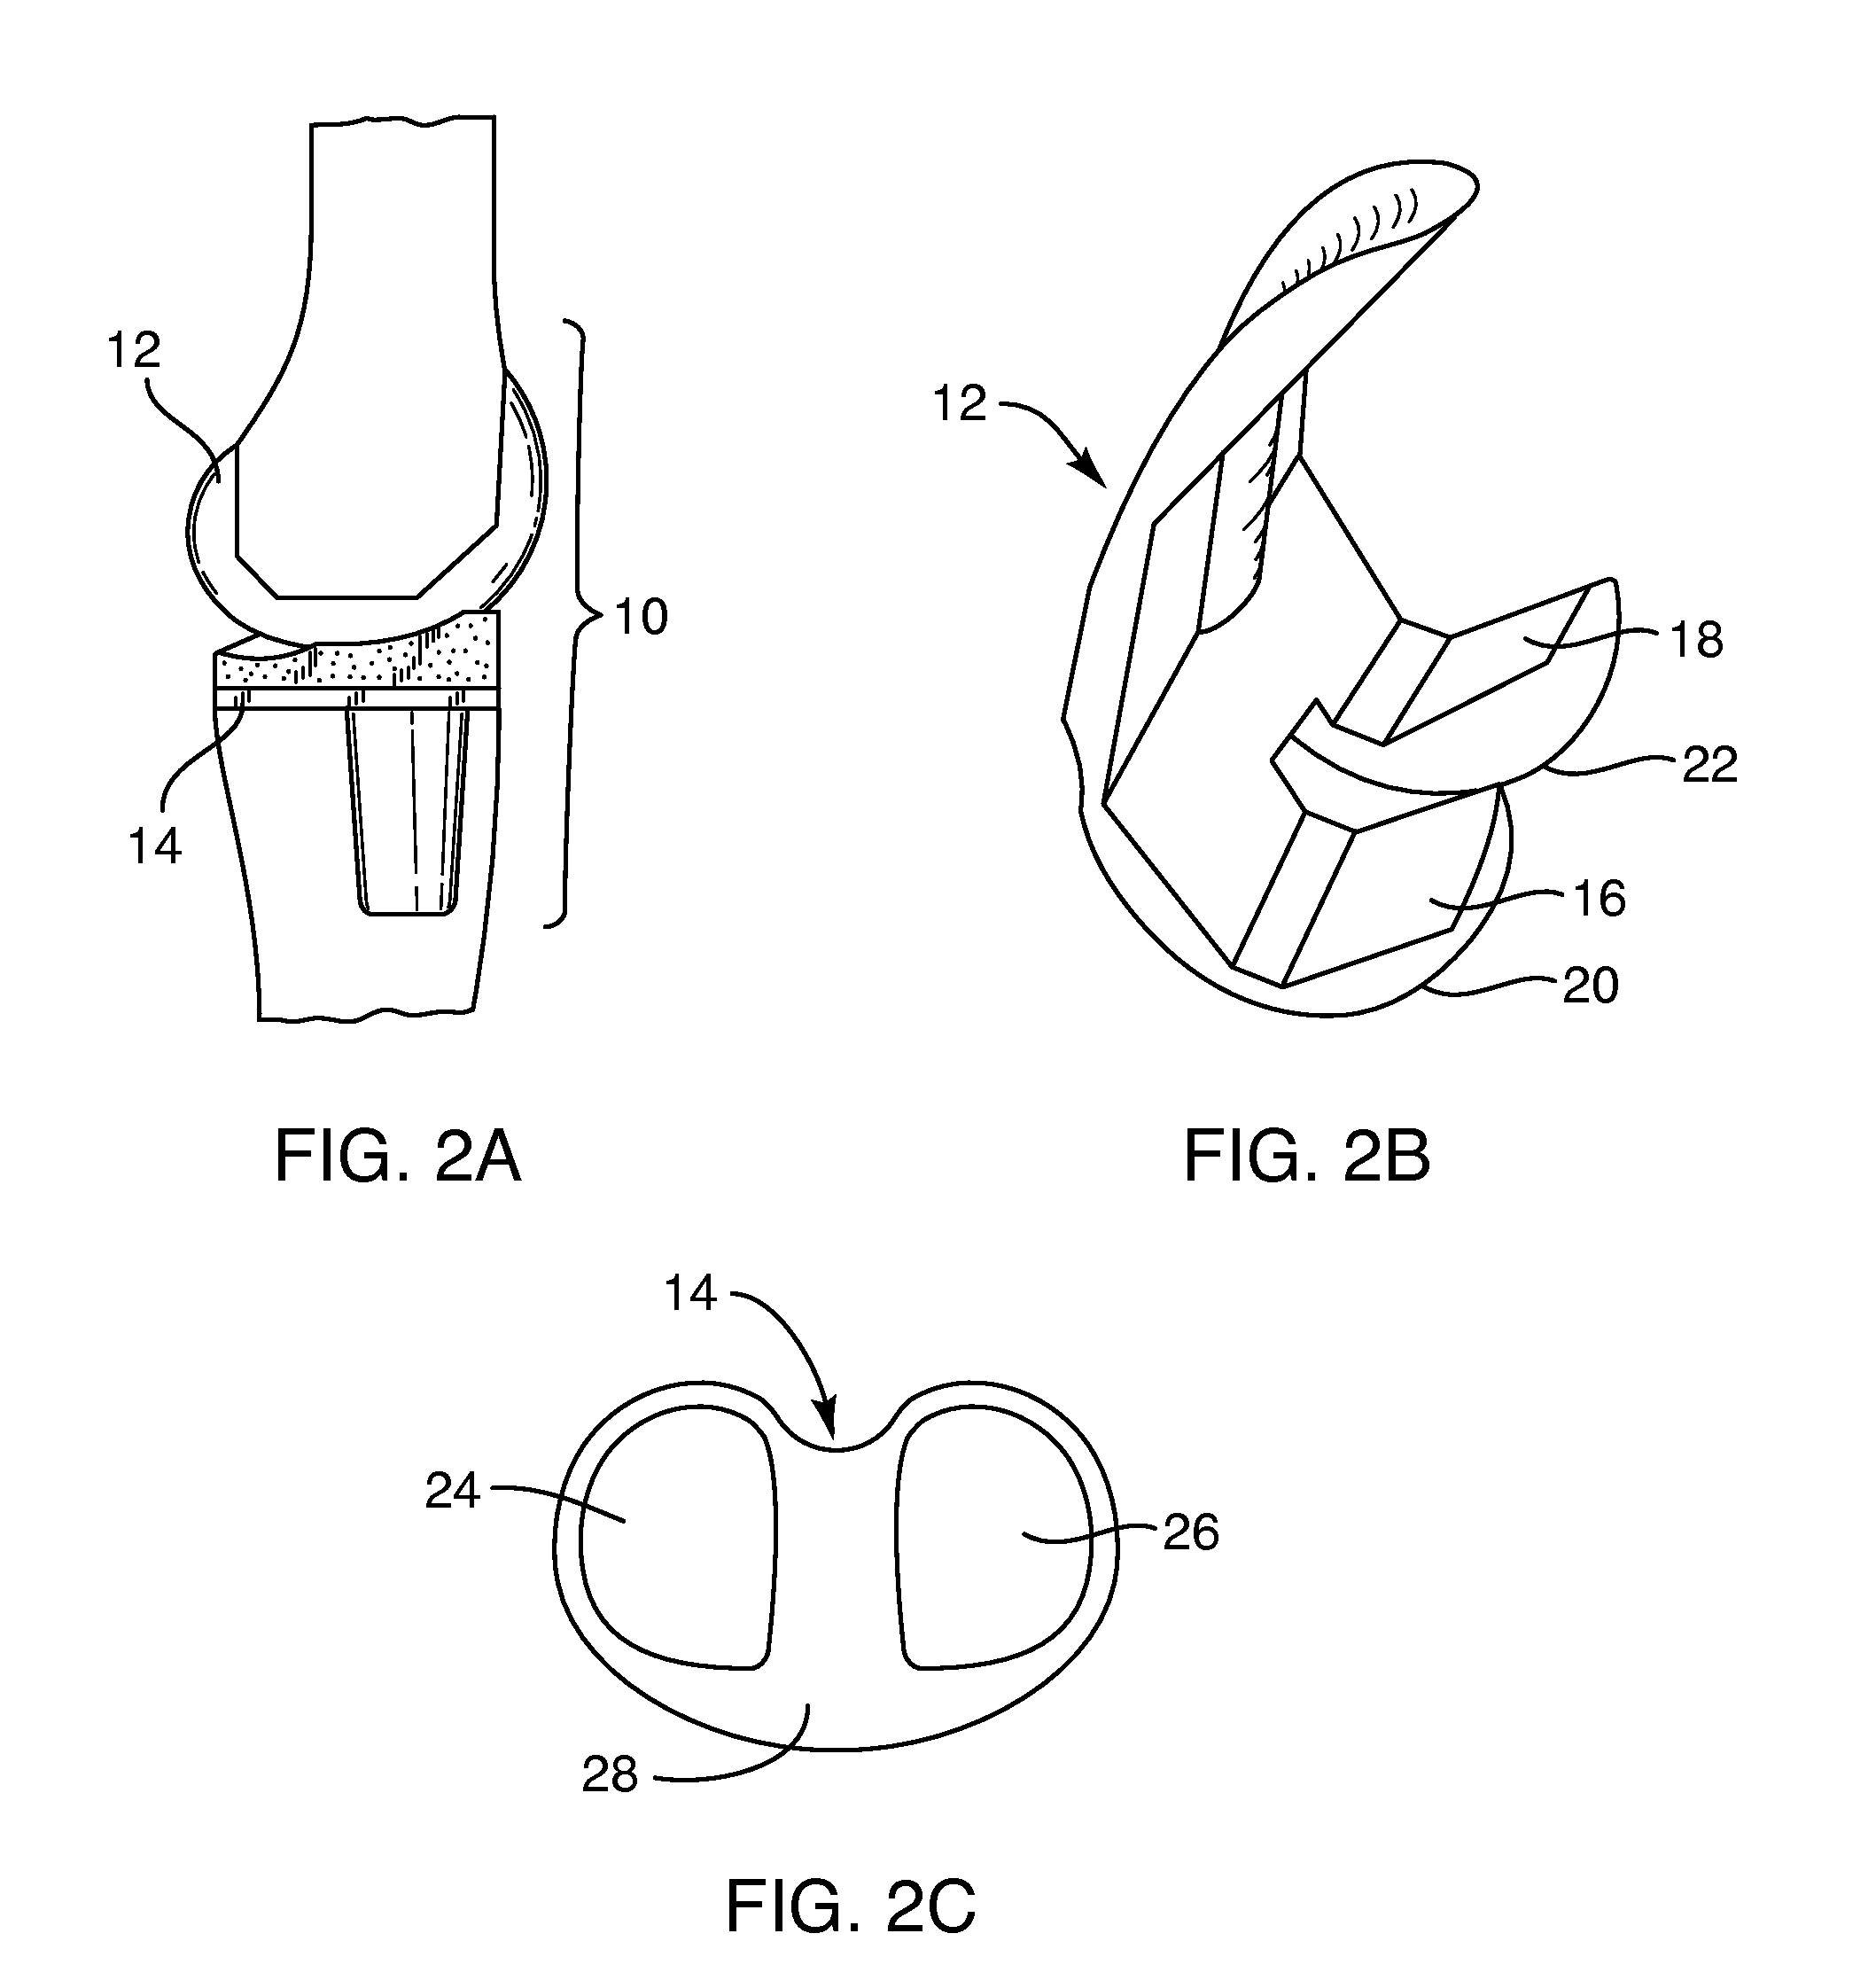 Systems and methods for providing a femoral resection block